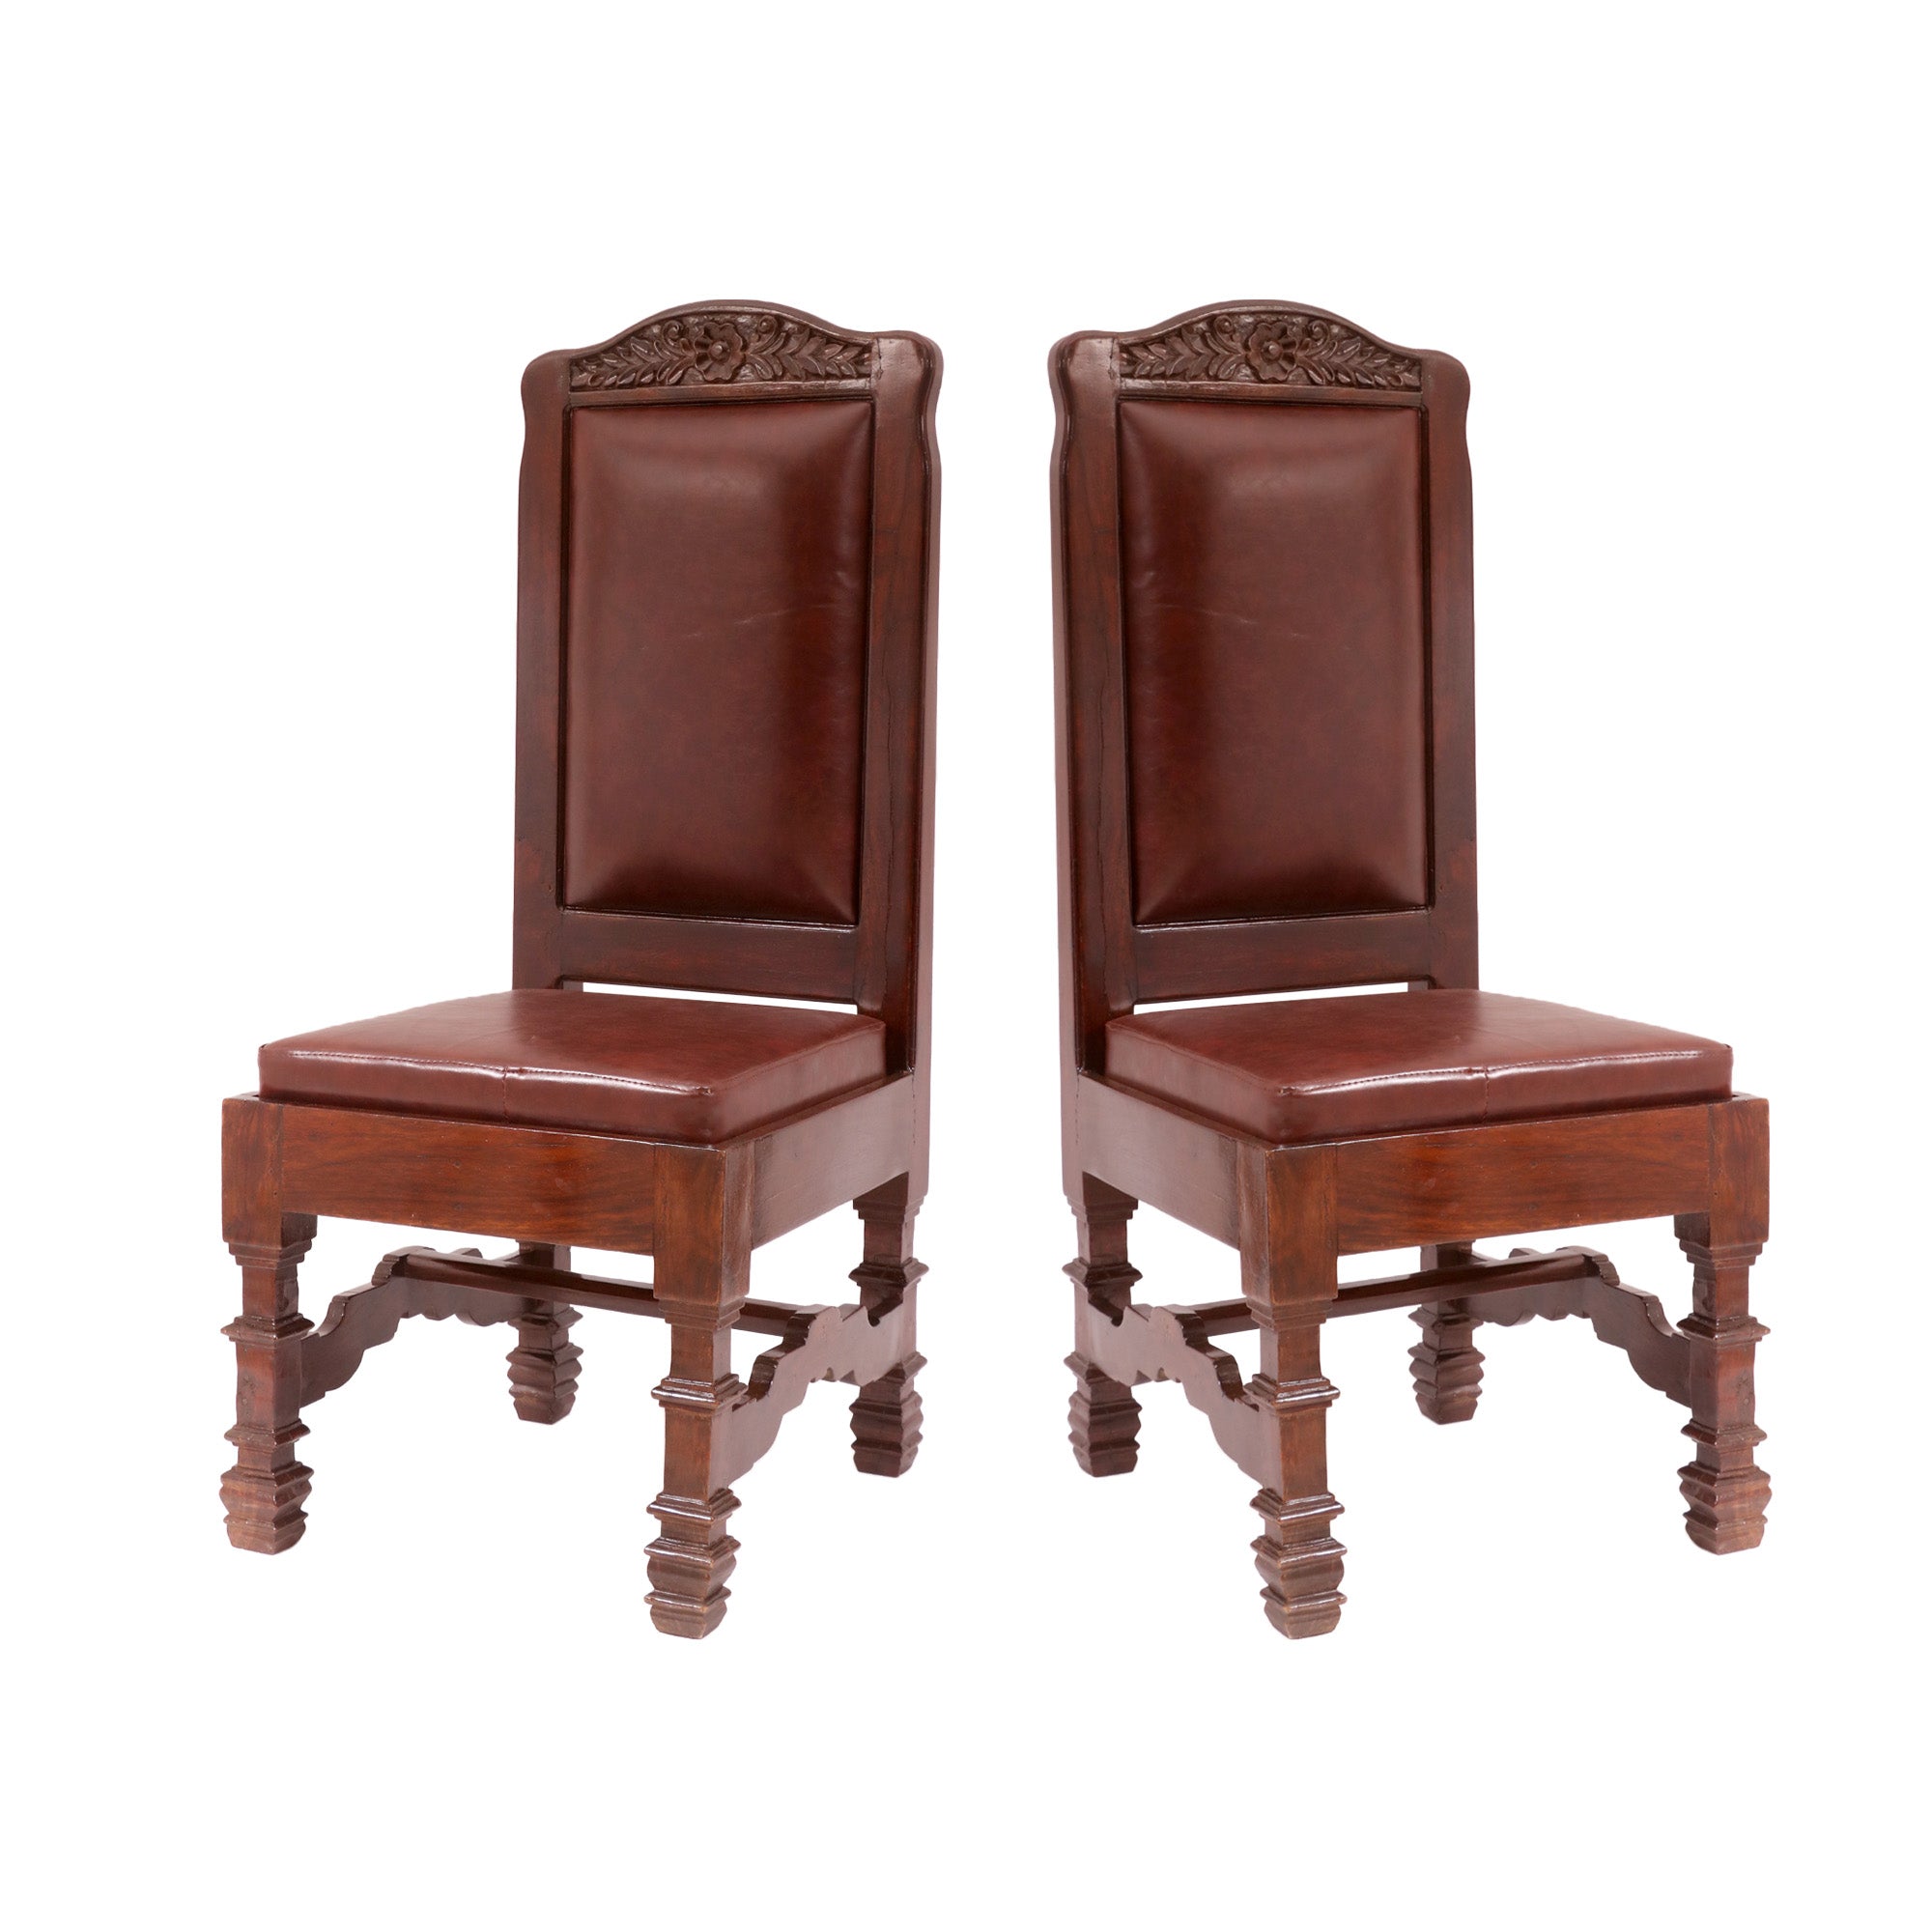 (Set of 2) Medium brown Simple Stepwell Dinning Chair Dining Chair